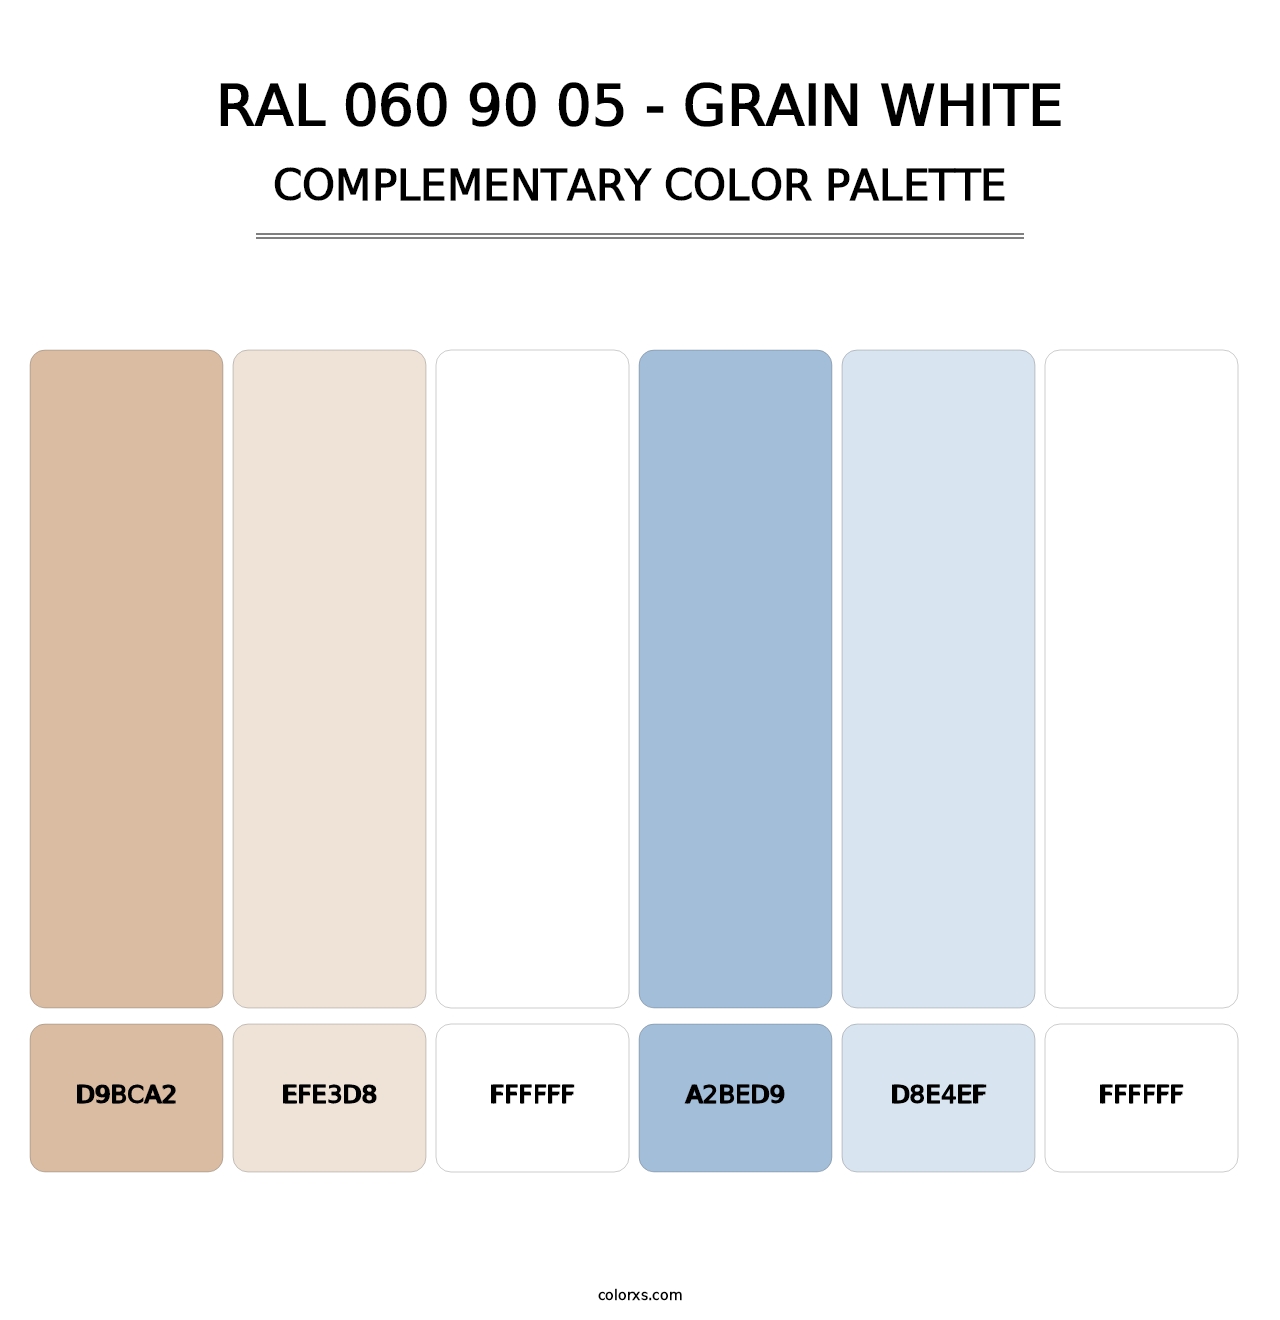 RAL 060 90 05 - Grain White - Complementary Color Palette